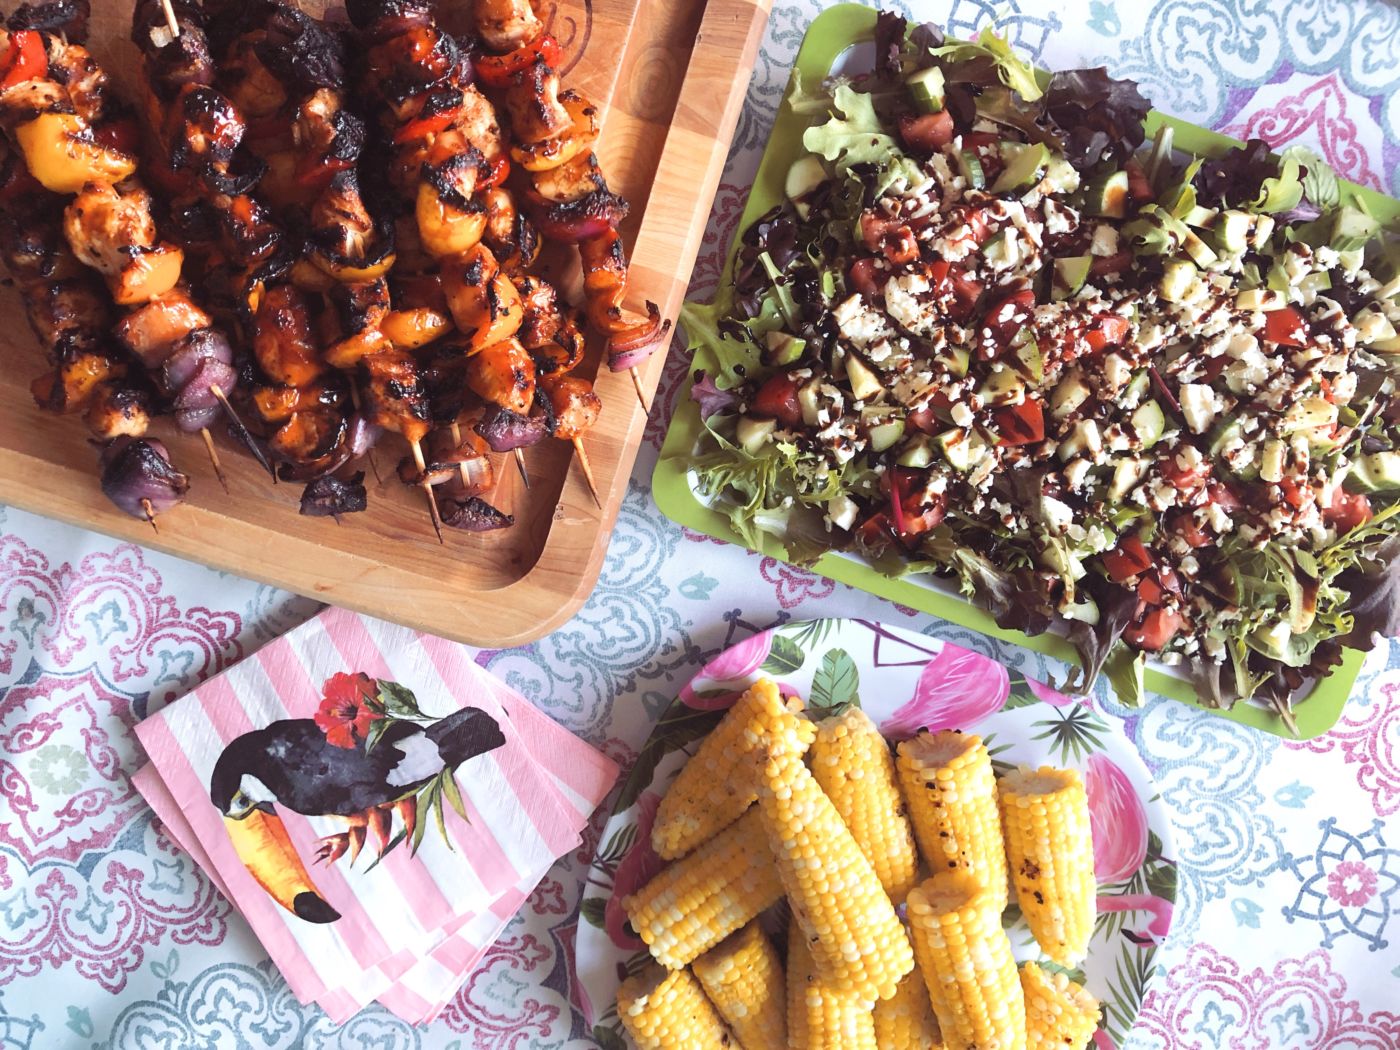 food options for summer entertaining